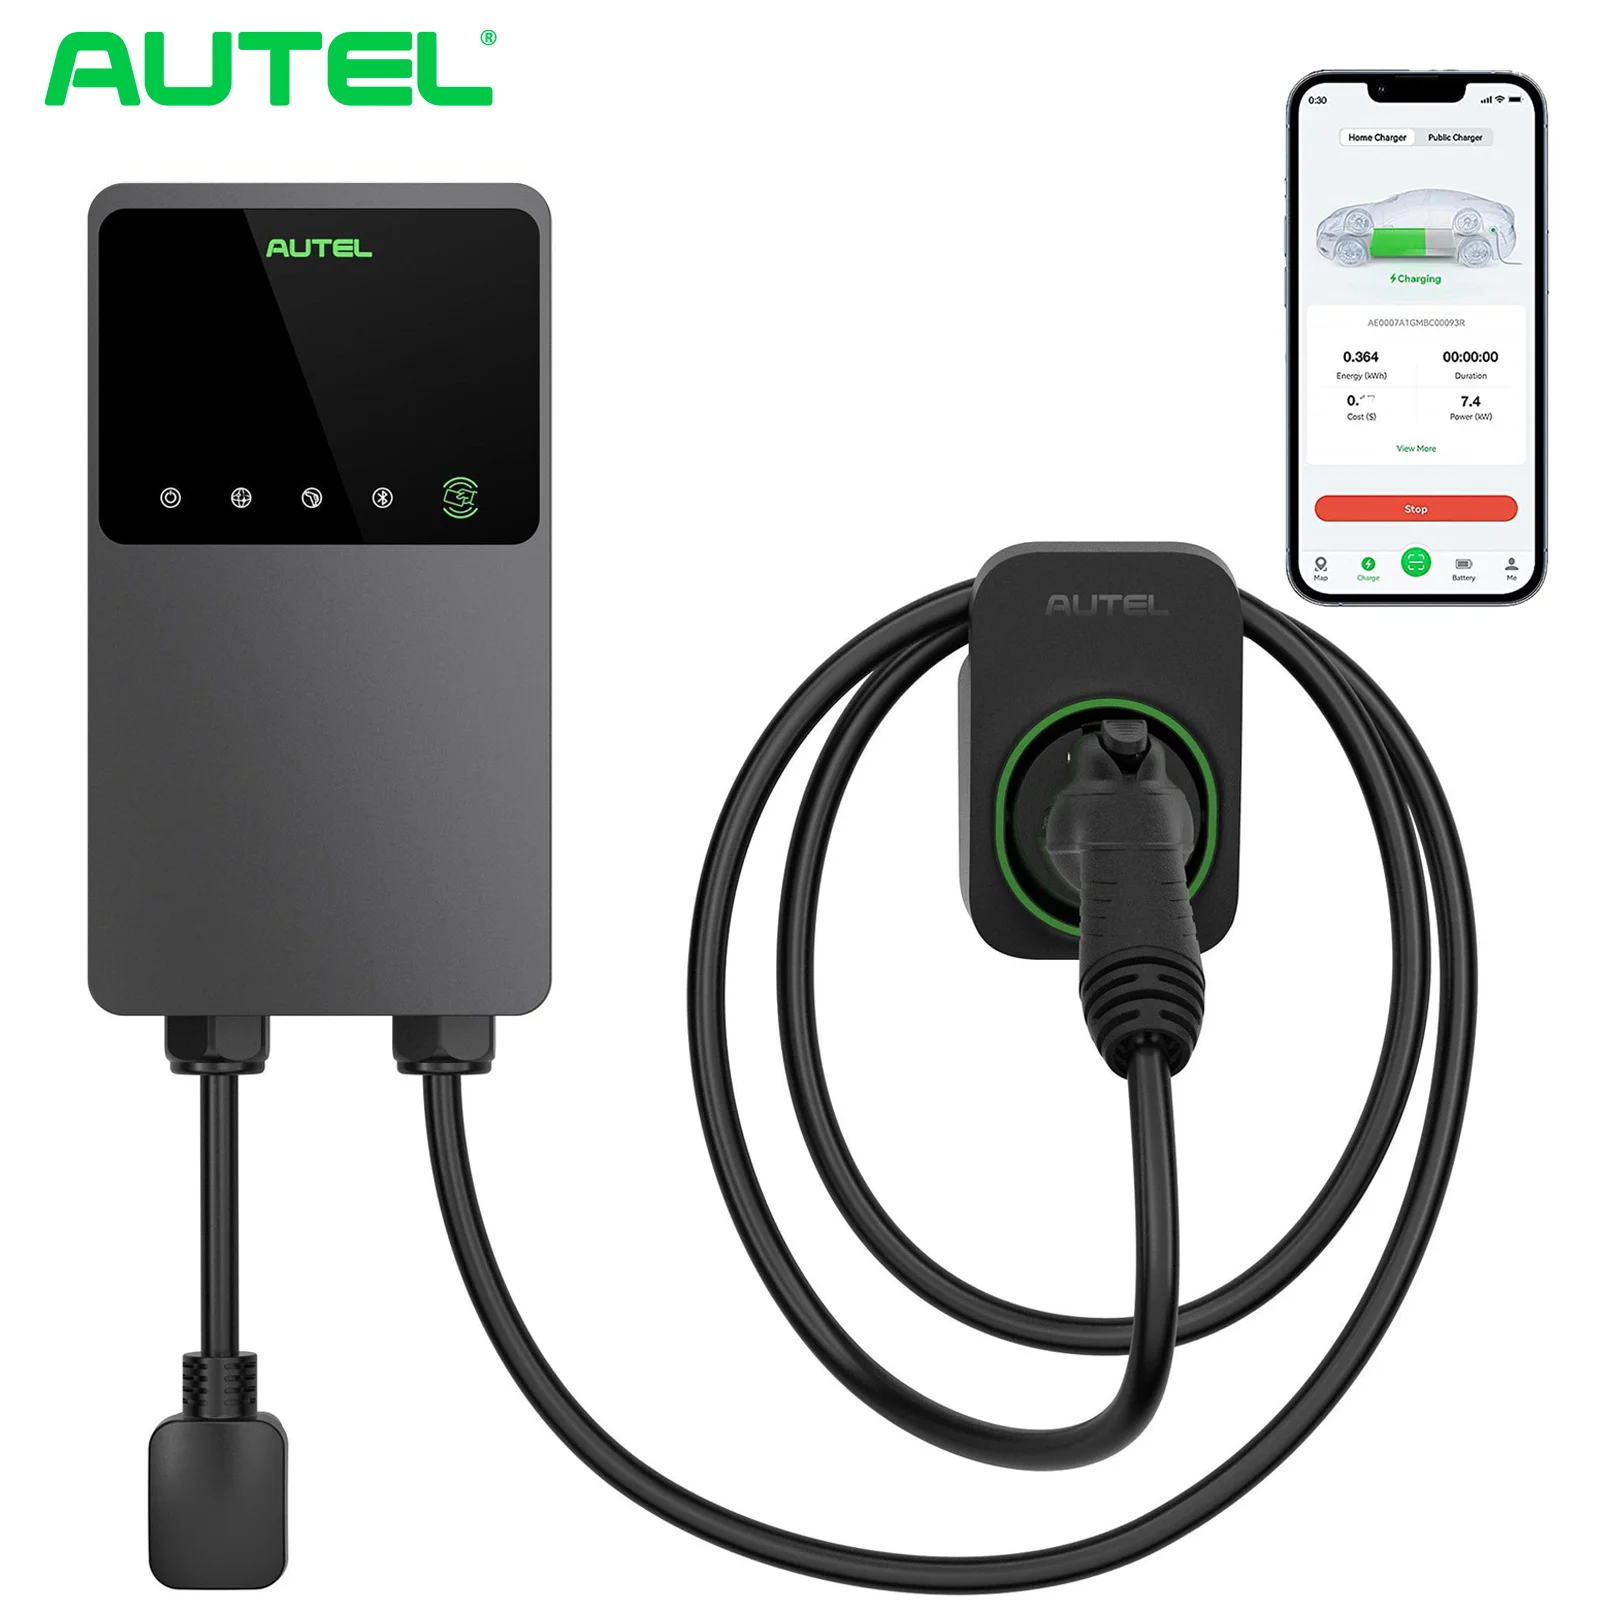 

Autel RFID WIFI Enable 40A 240V 10KW Wallbox EVSE EV Charger Level 2 for Home J1772 Electric Vehicle Charging Station NEMA 6-50